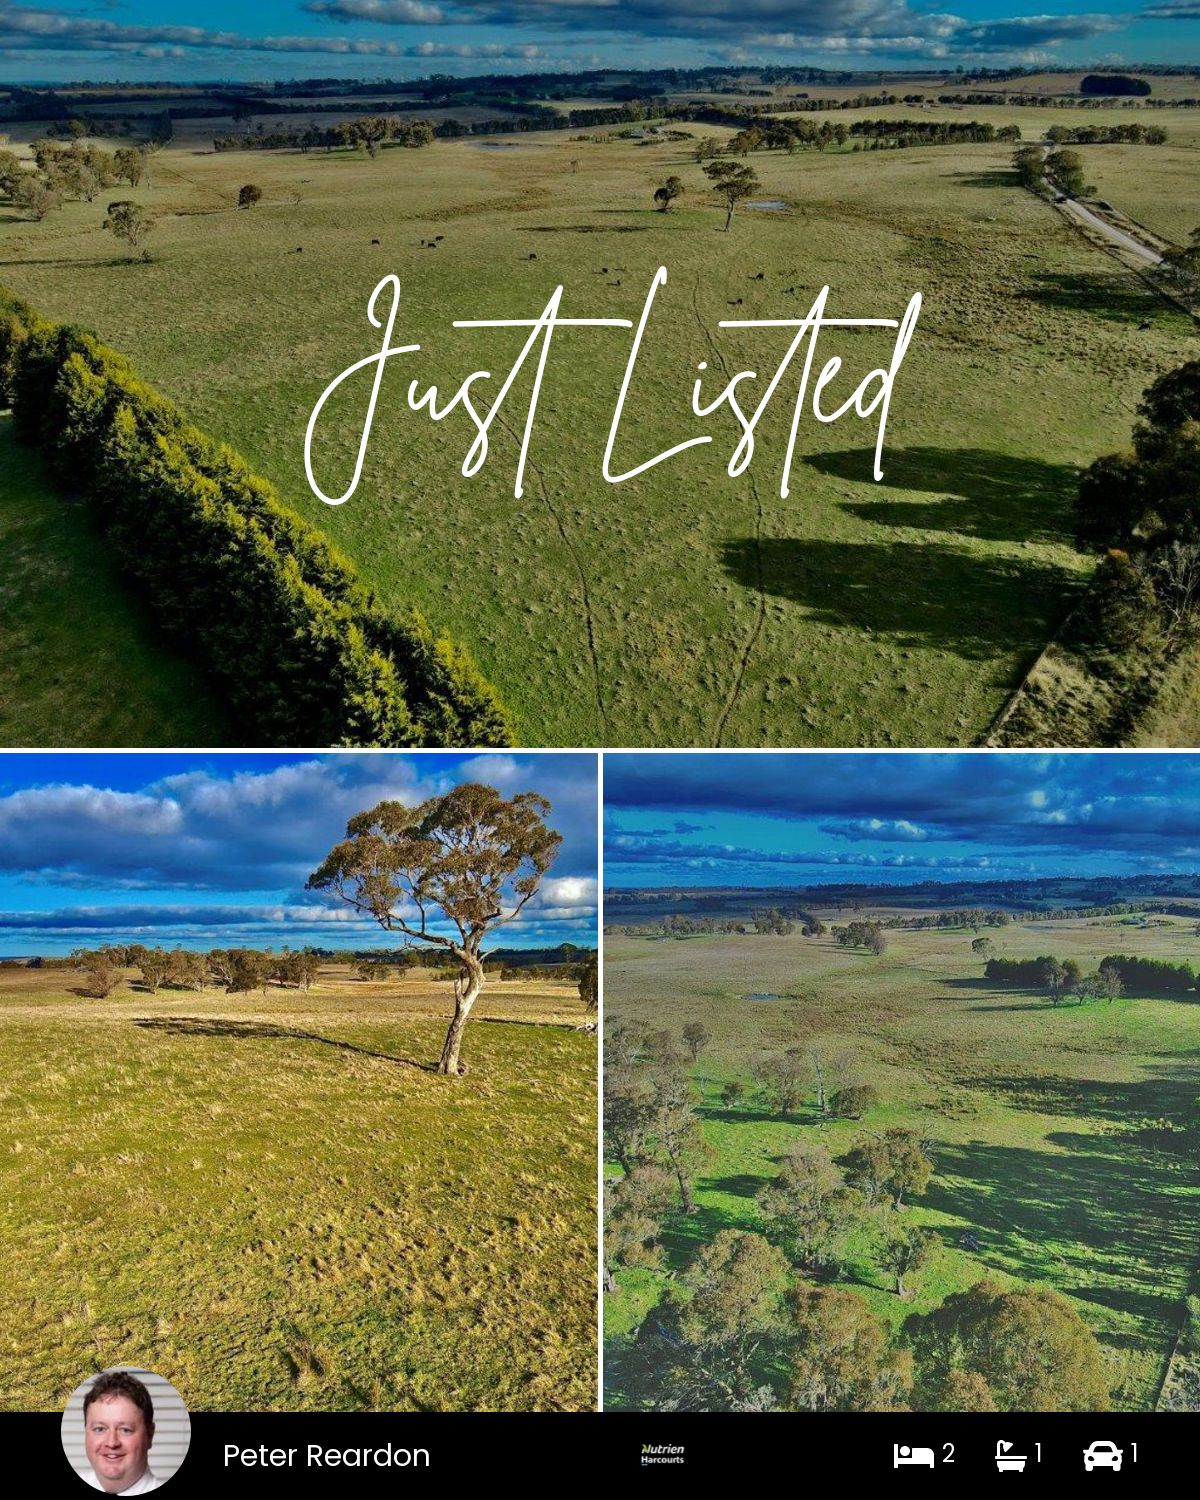 Lot 4 DP1119332 Mount Rae Road Roslyn, Crookwell, NSW 2583 | Realty.com.au